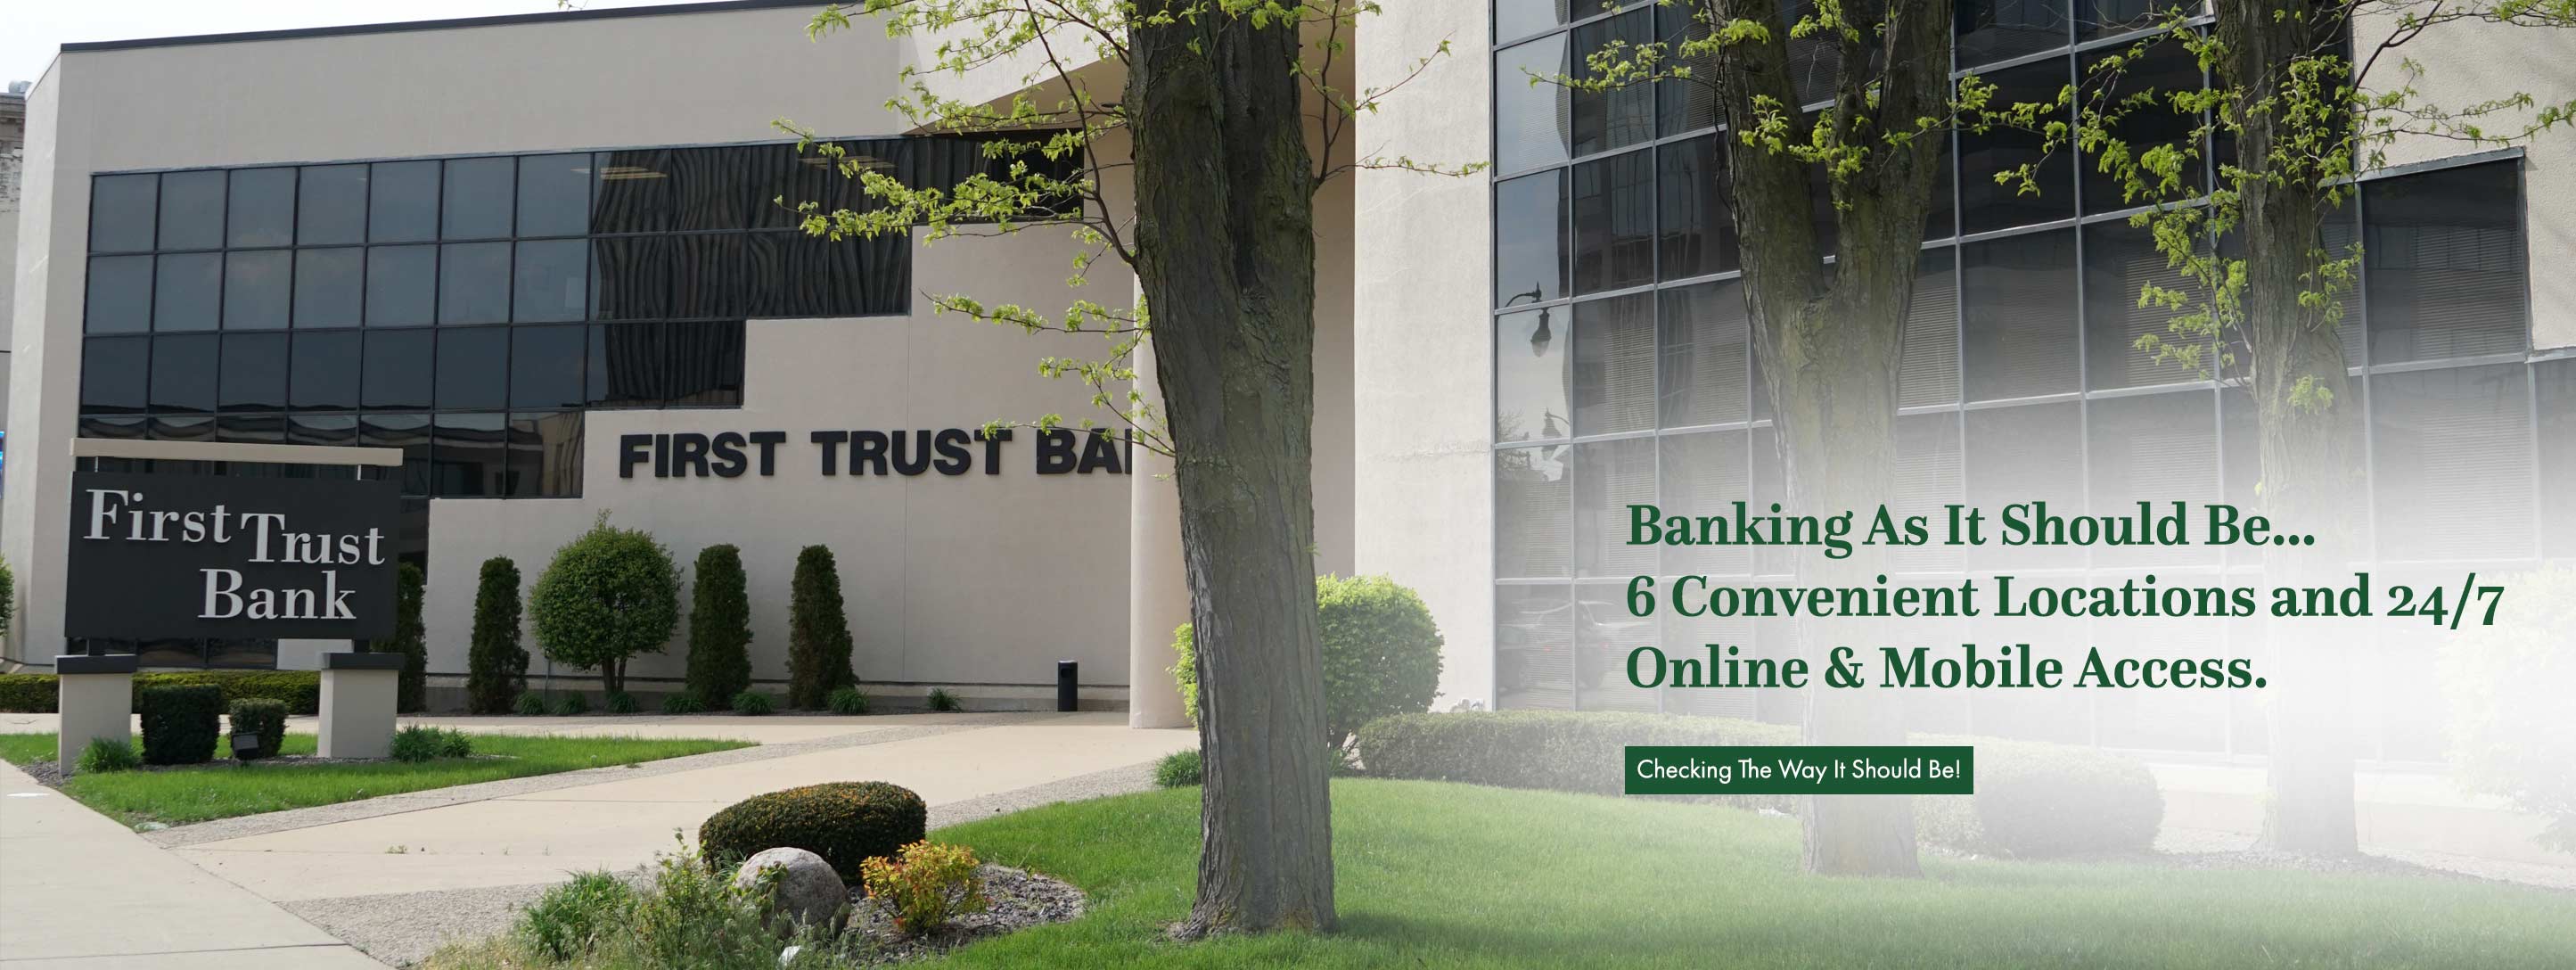 Banking as it should be... 6 convenient locations and 24/7 online & mobile access.